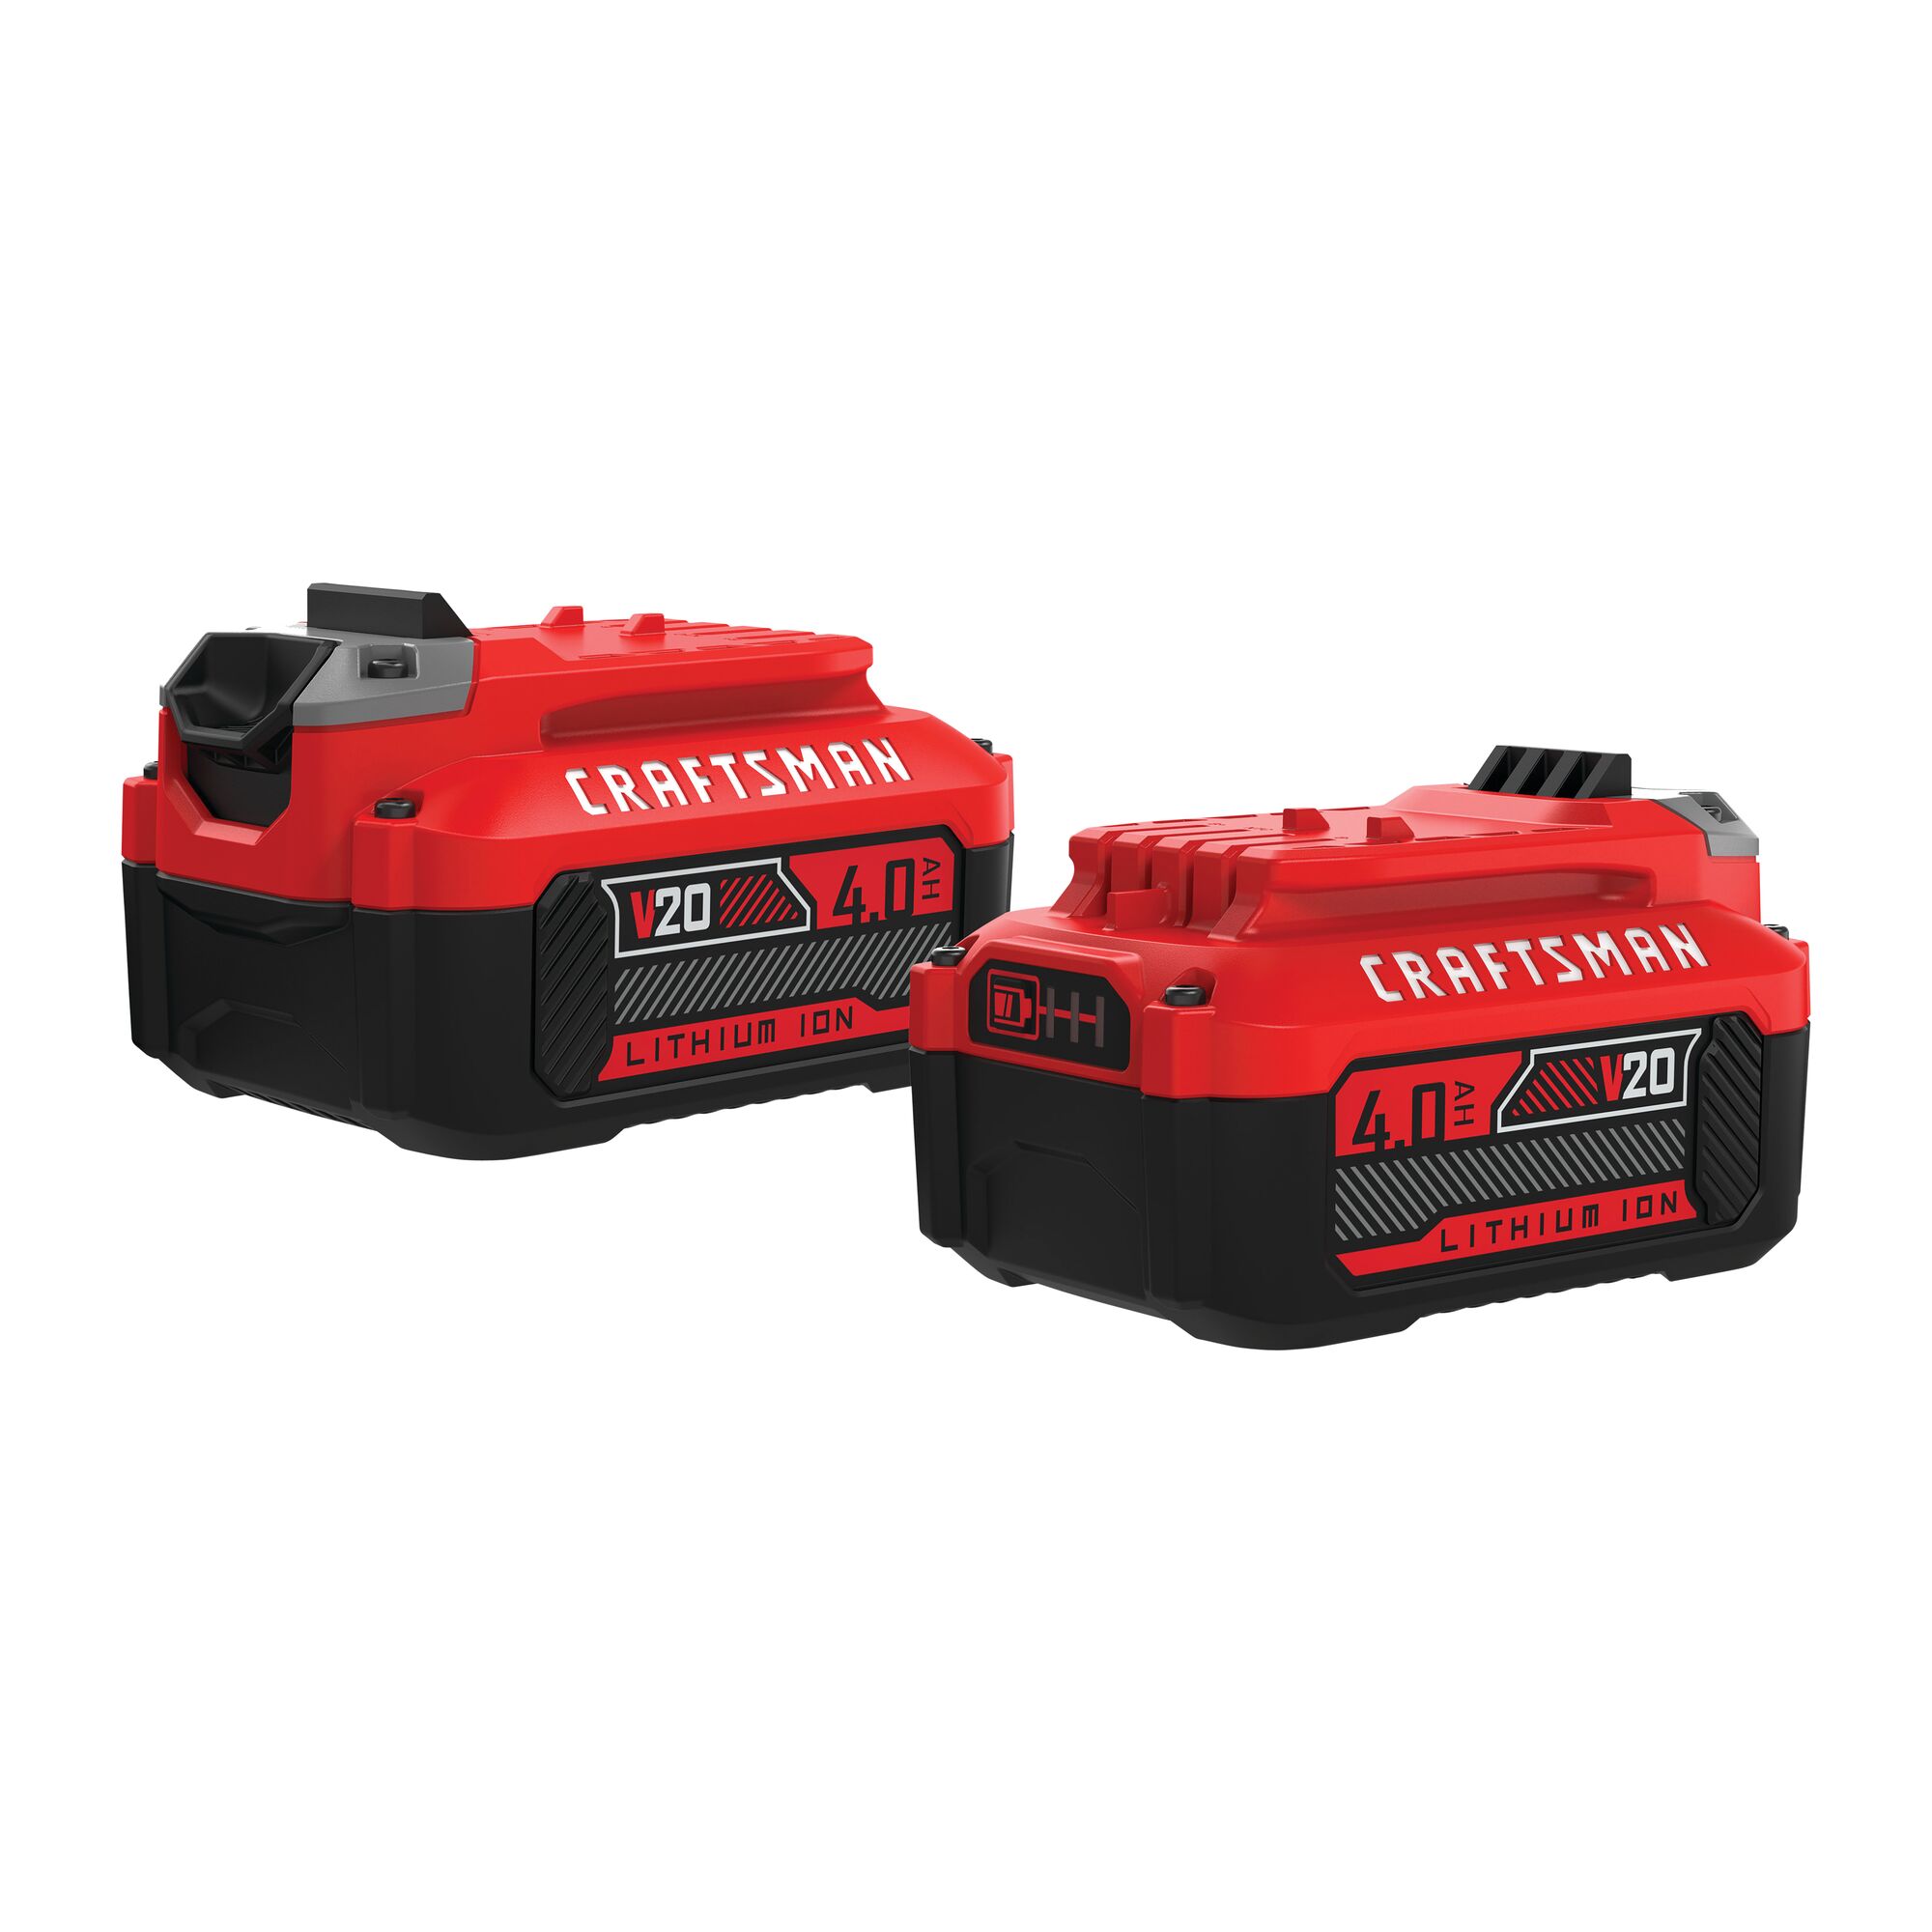 CRAFTSMAN Power Tool Batteries & Chargers at 